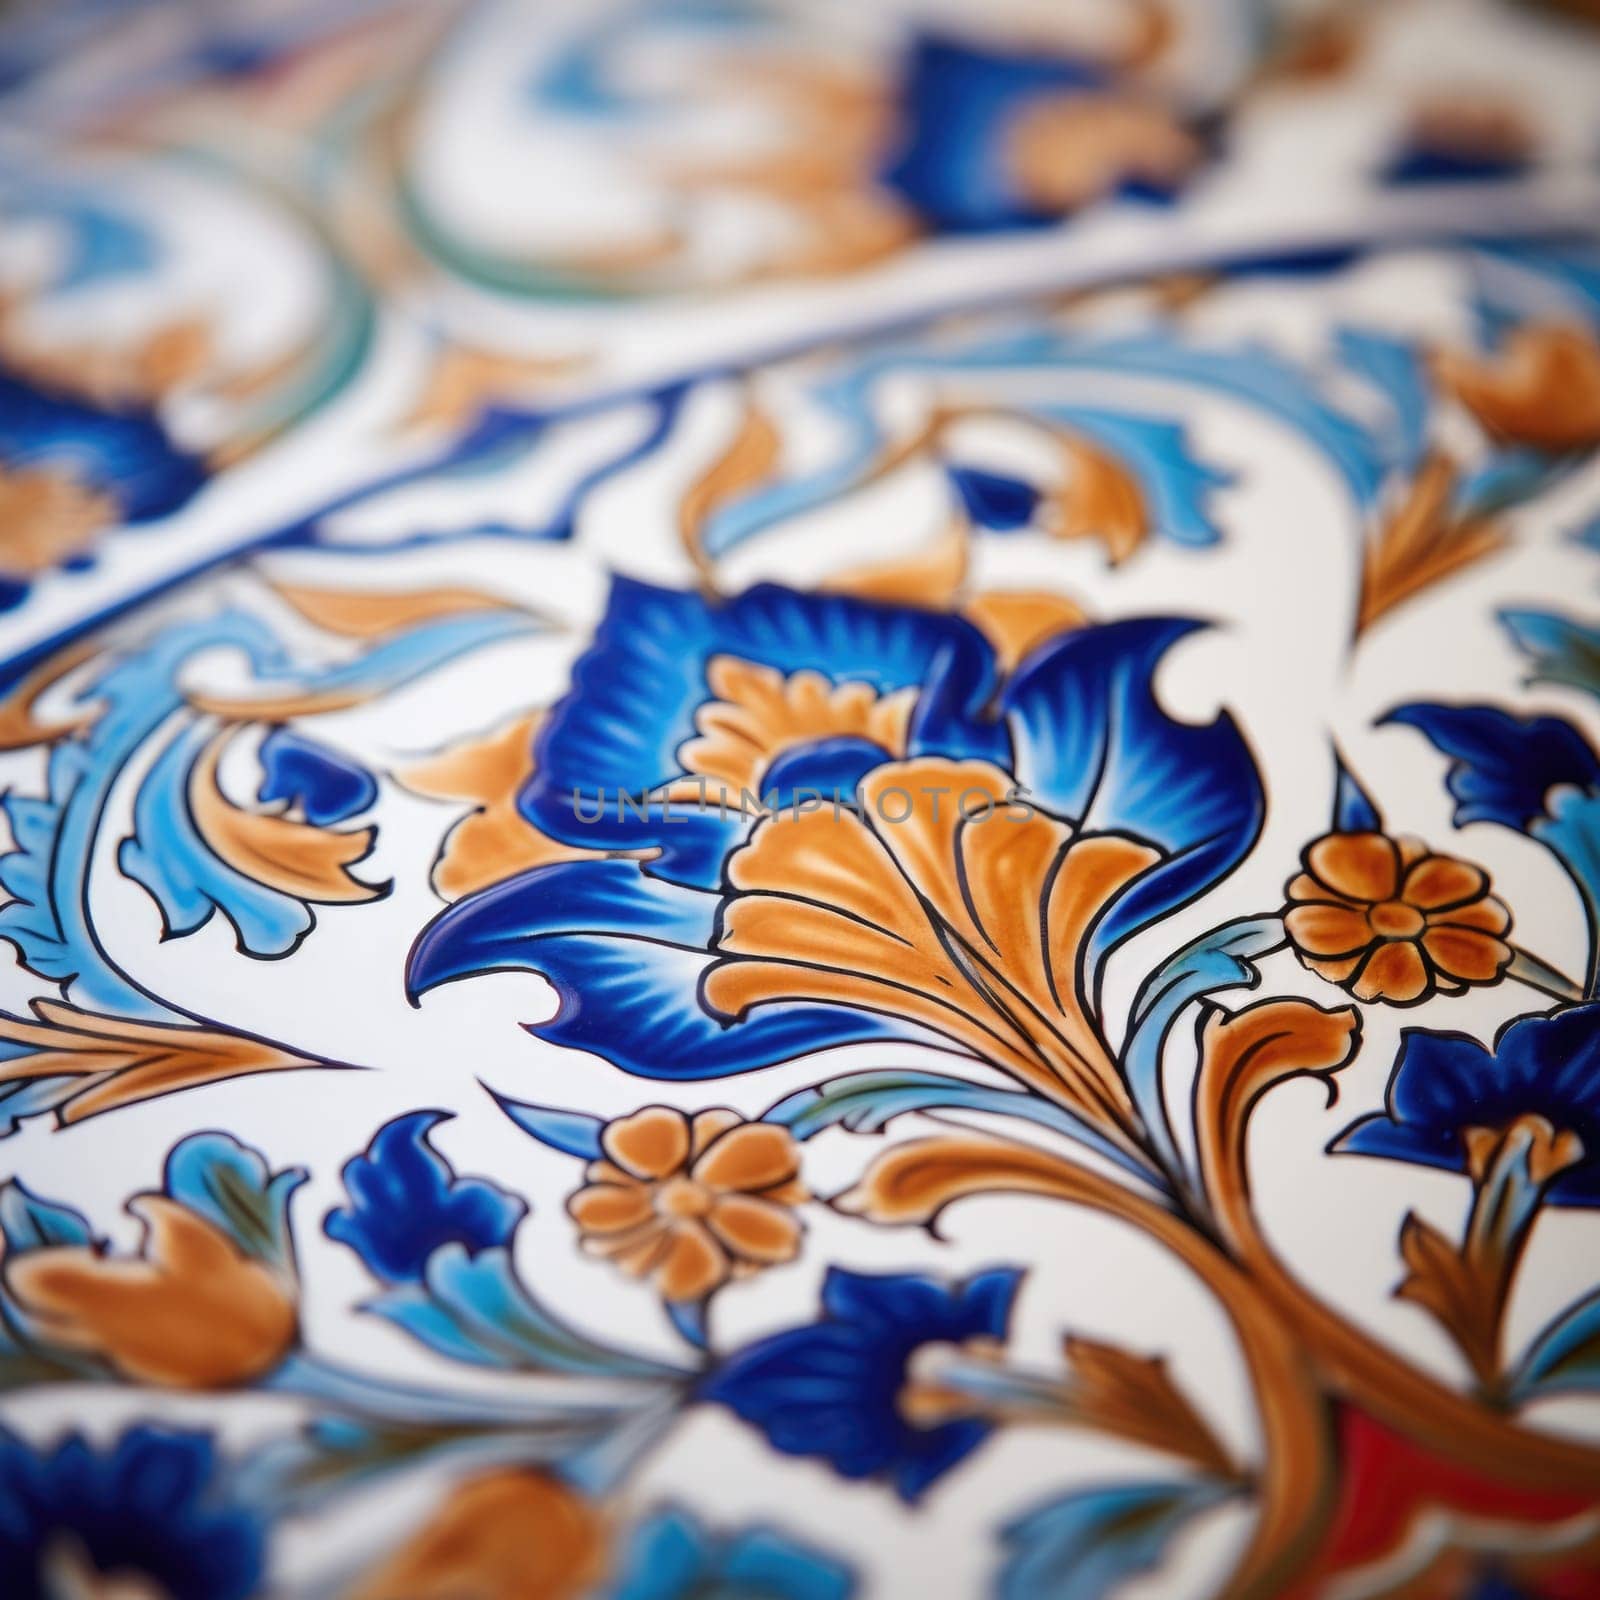 A close up of a decorative plate with blue and orange flowers